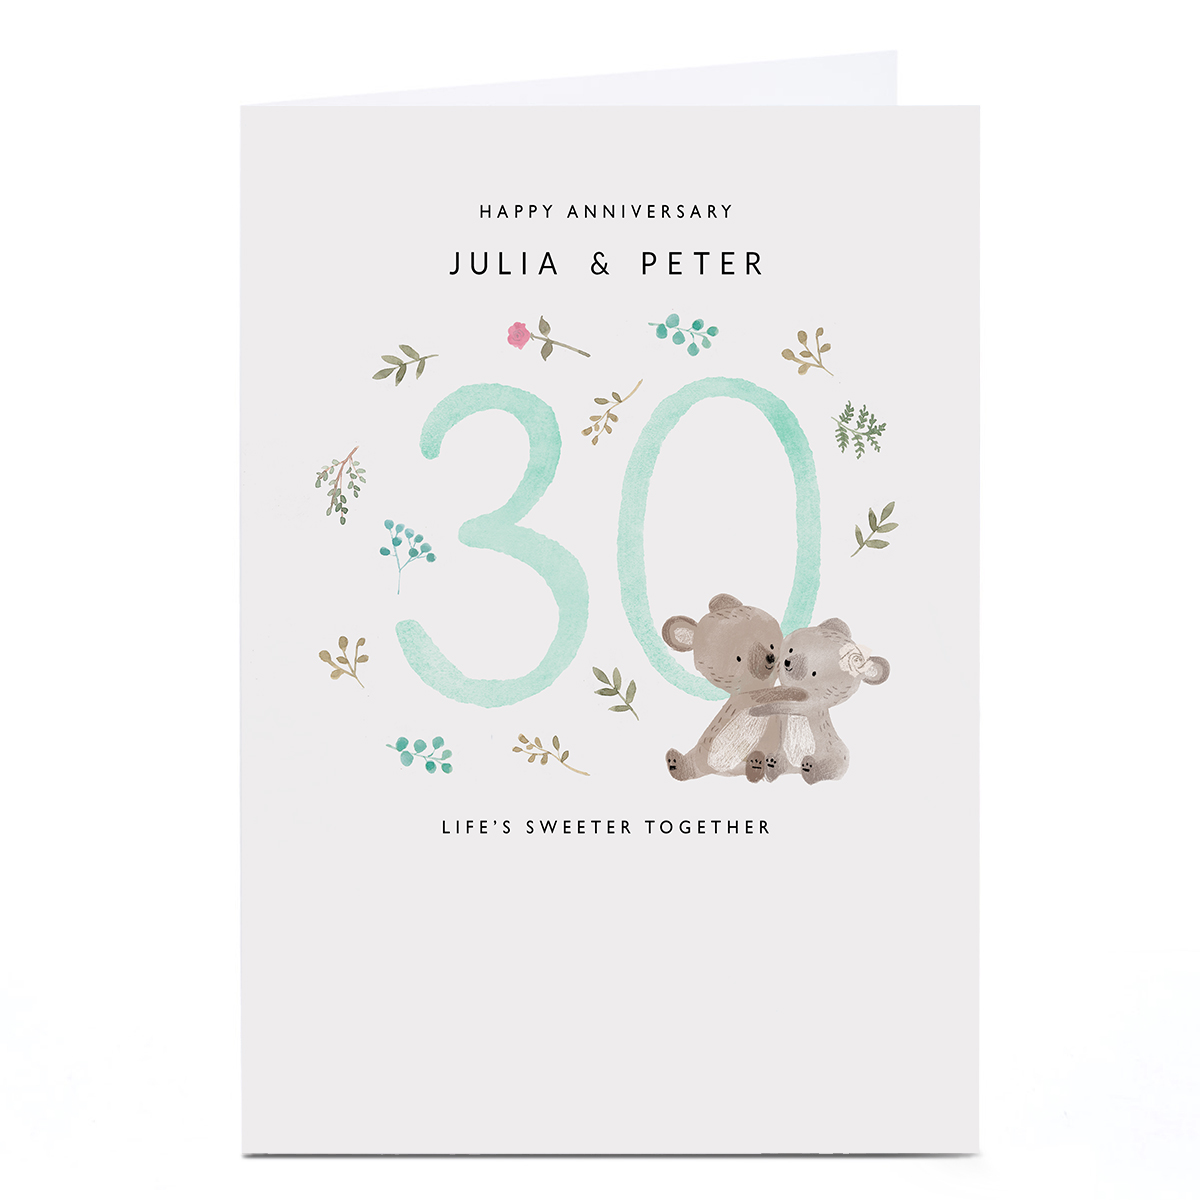 Personalised 30th Anniversary Card - Life's Sweeter Together